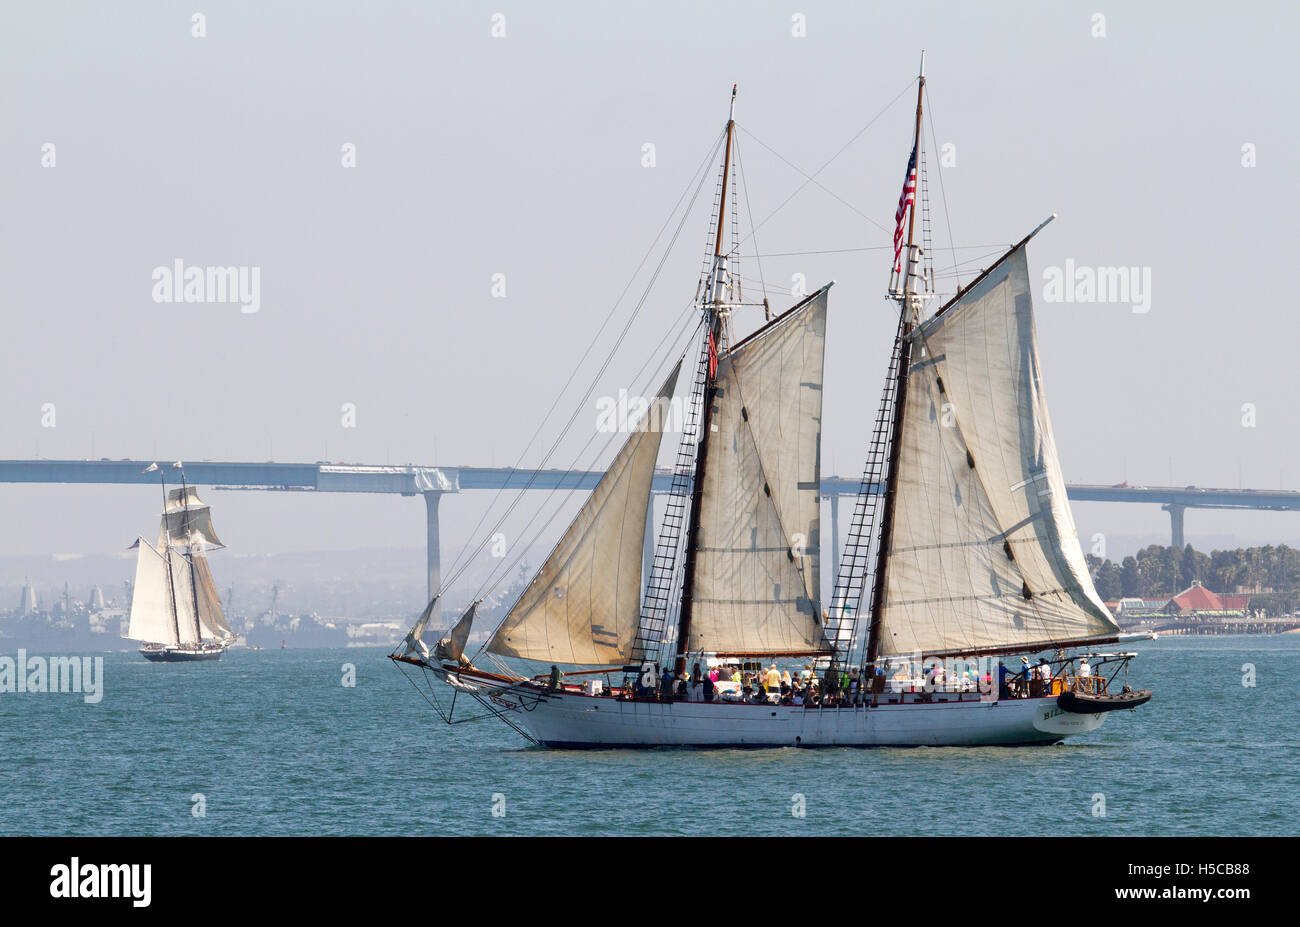 Tall ship Bill of Rights in 2016 Festival of Sail, Parade of Ships, San Diego Bay, CA with Coronado Bridge in background Stock Photo